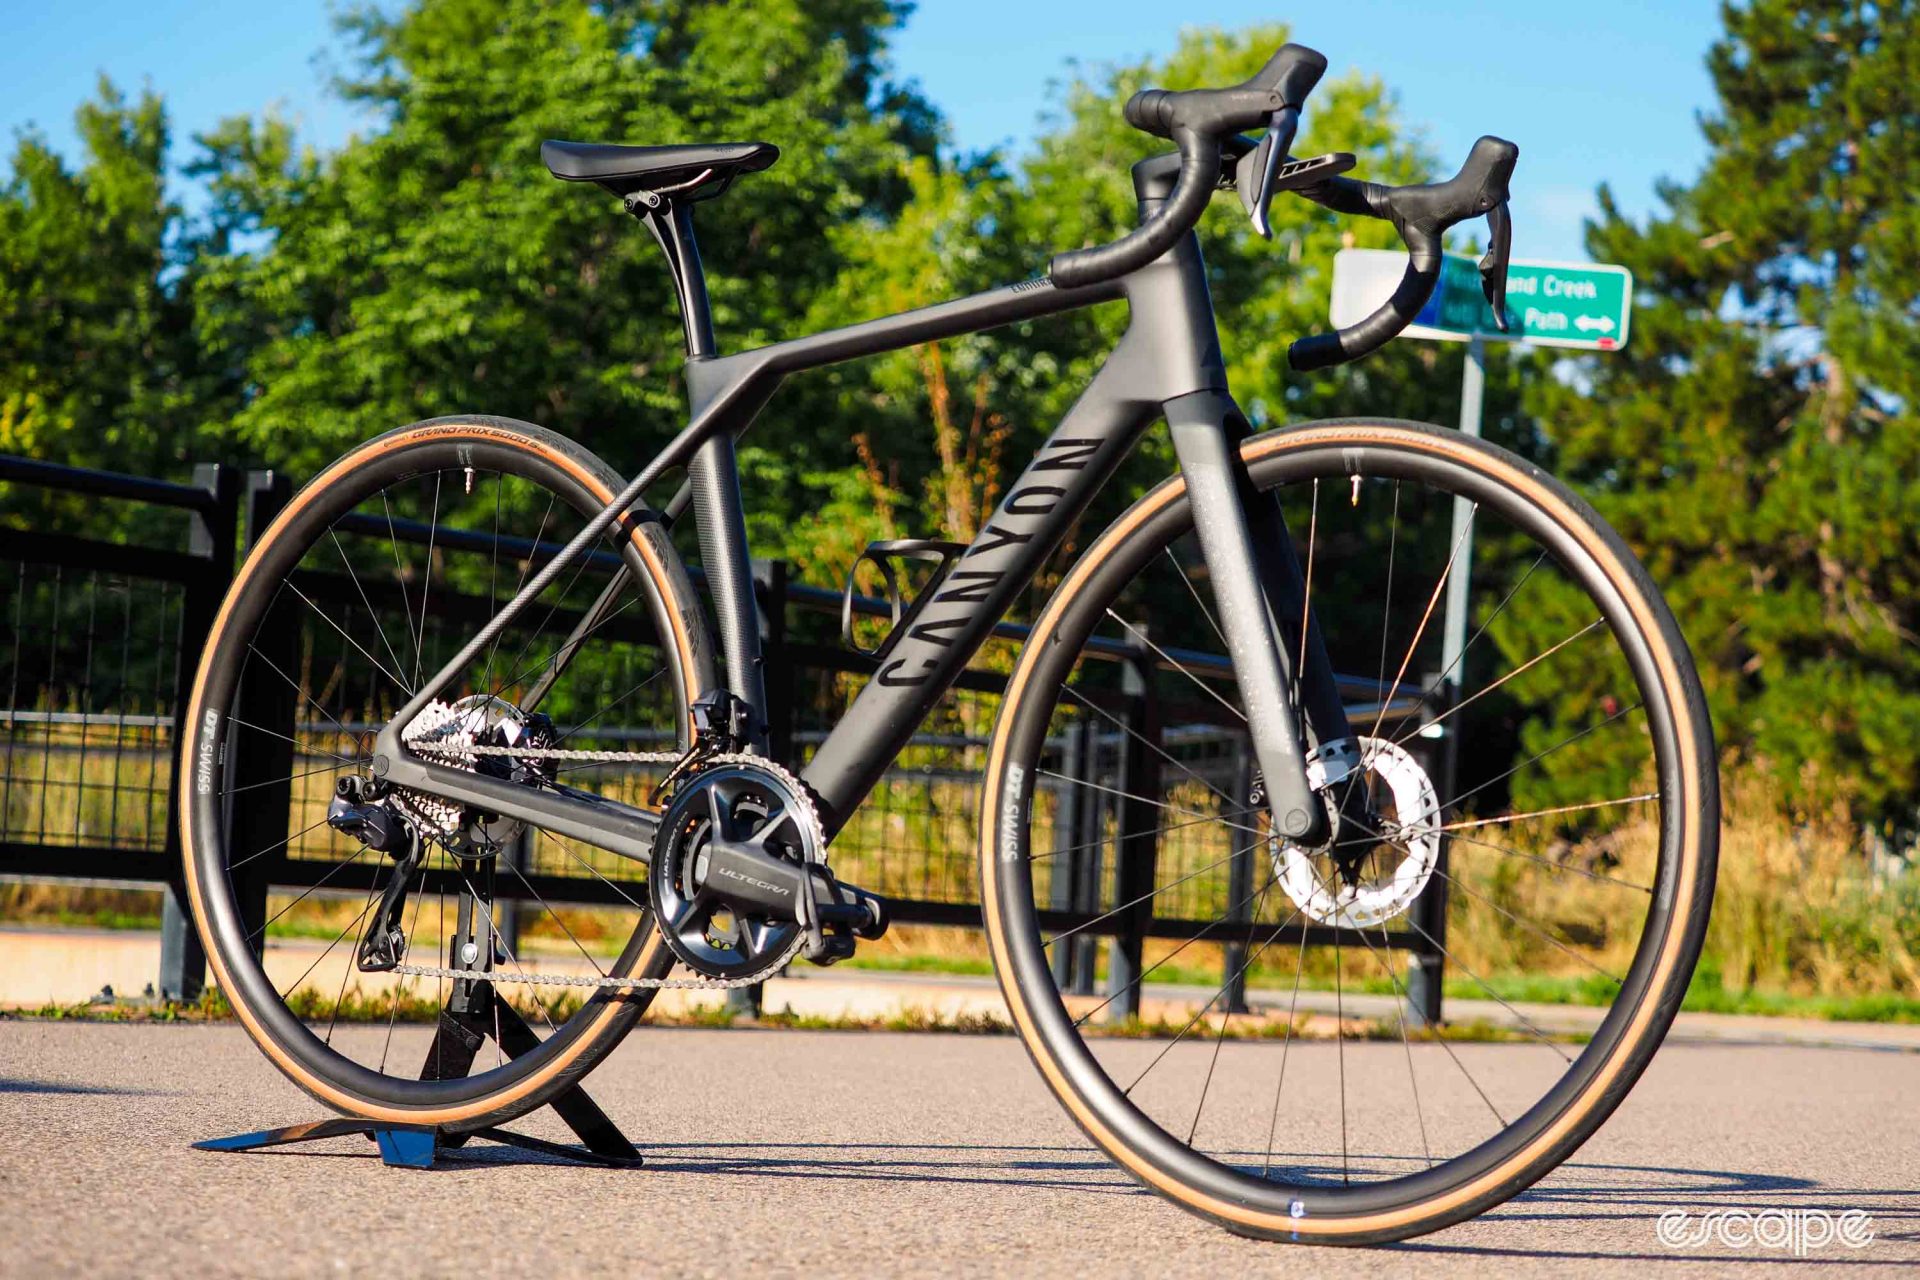 The 2024 Canyon Endurace CF is a subtle evolution. In this profile photo with the bike facing slightly toward the camera, at first glance you might mistake it for the existing model.